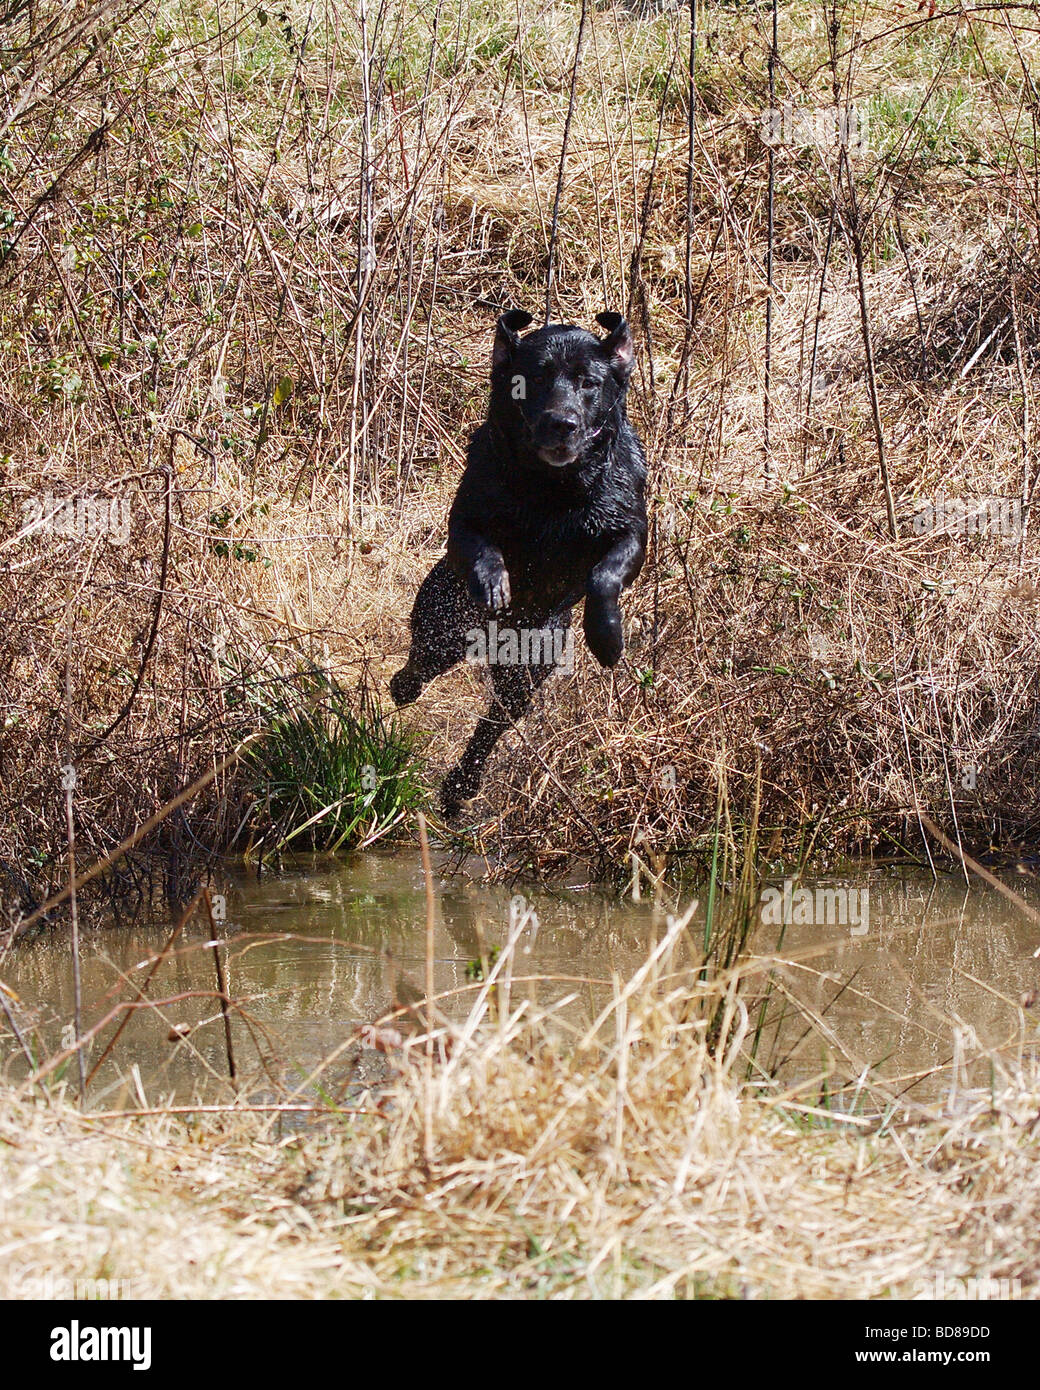 BLACK LAB LABRADOR ON A RETRIEVE CAUGHT IN MID AIR DIVING ACROSSED A CREEK Stock Photo